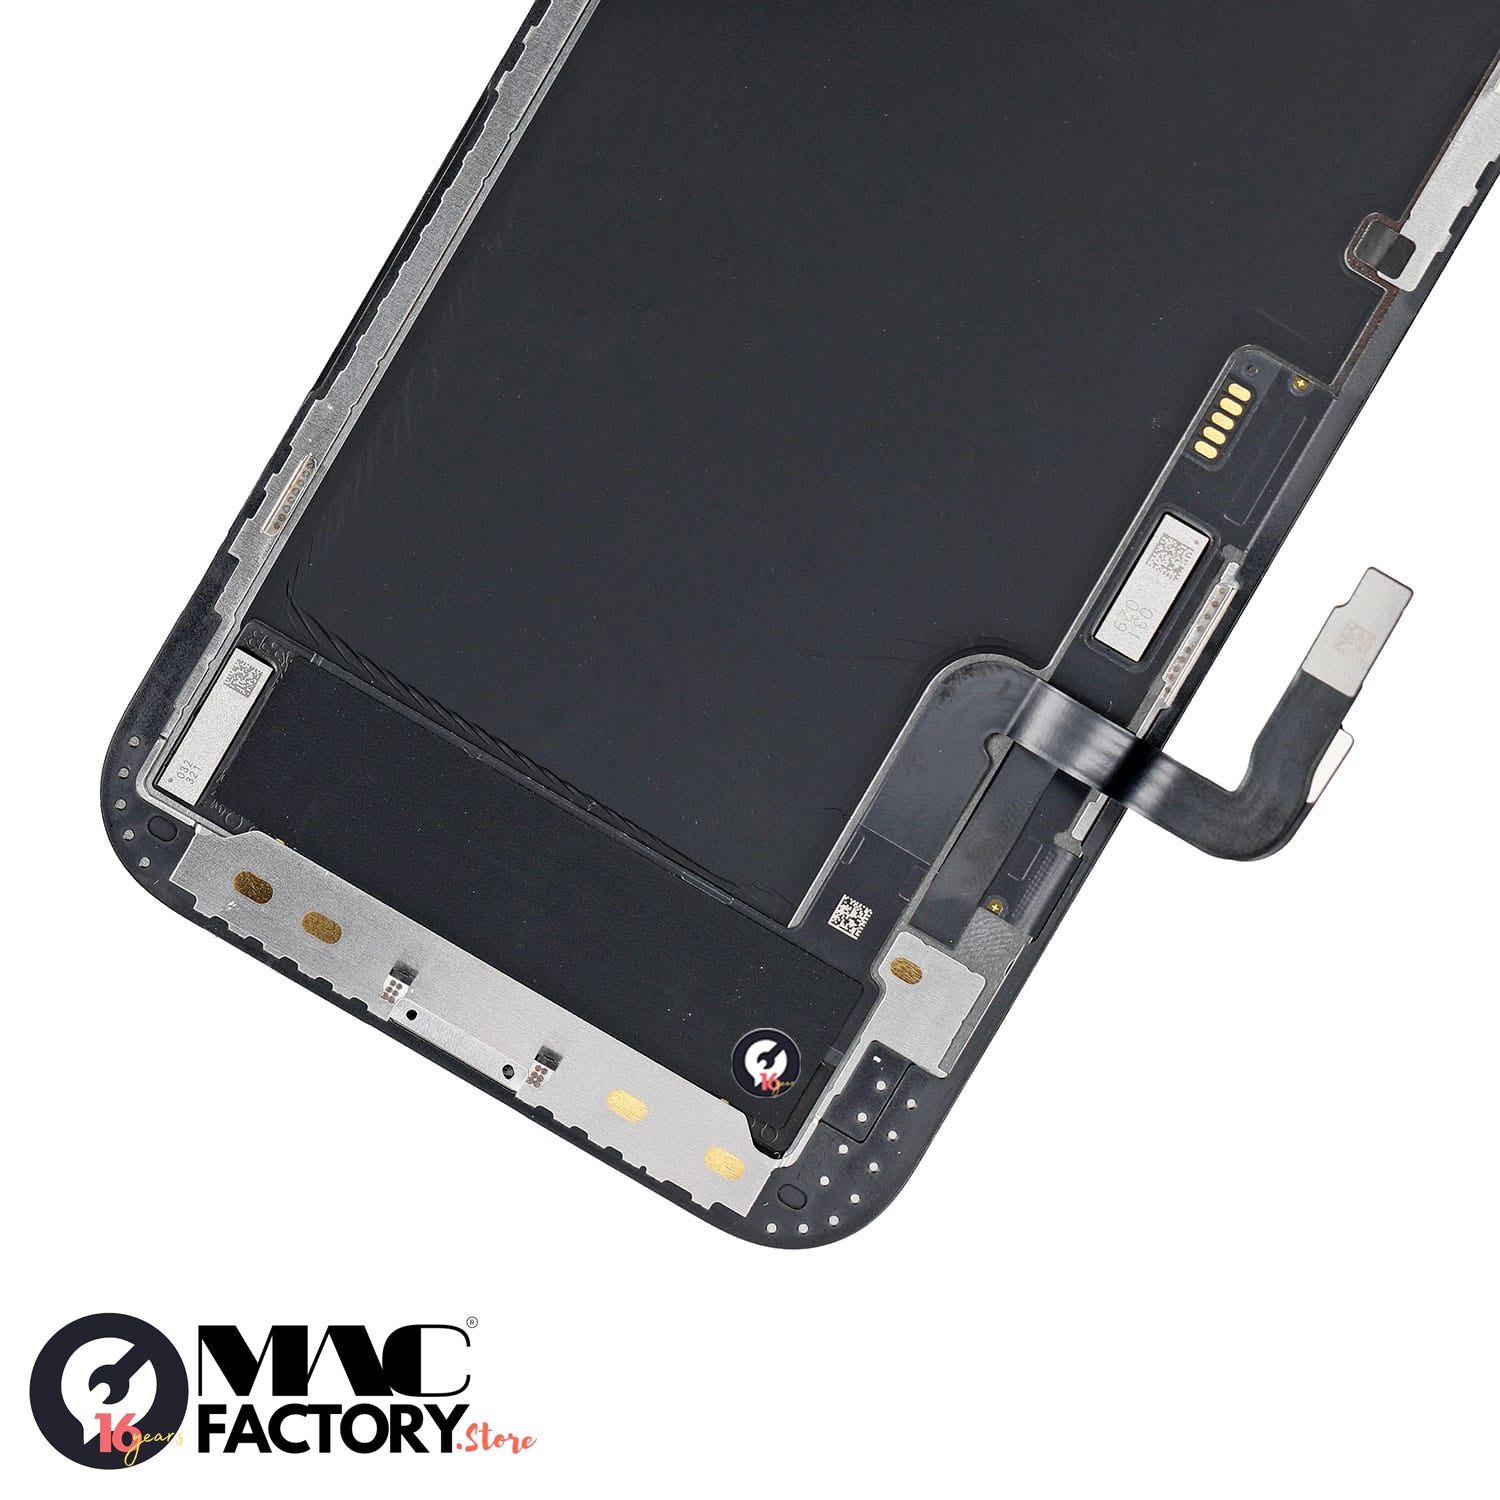 OLED SCREEN DIGITIZER ASSEMBLY FOR IPHONE 12/12 PRO- BLACK